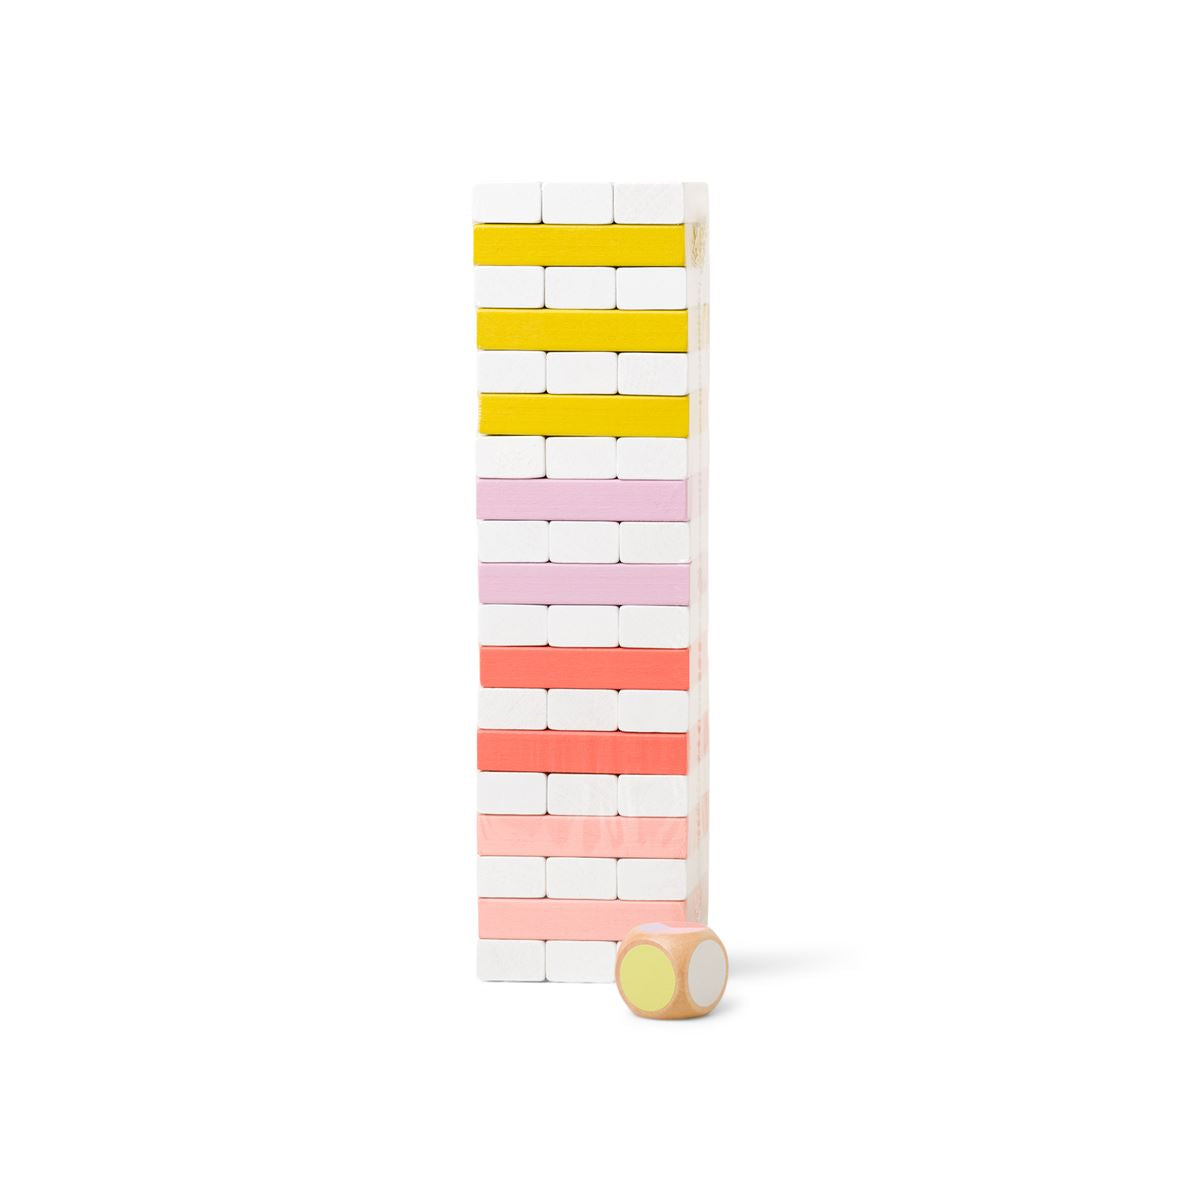 Tumbling Tower Game in Color Pop